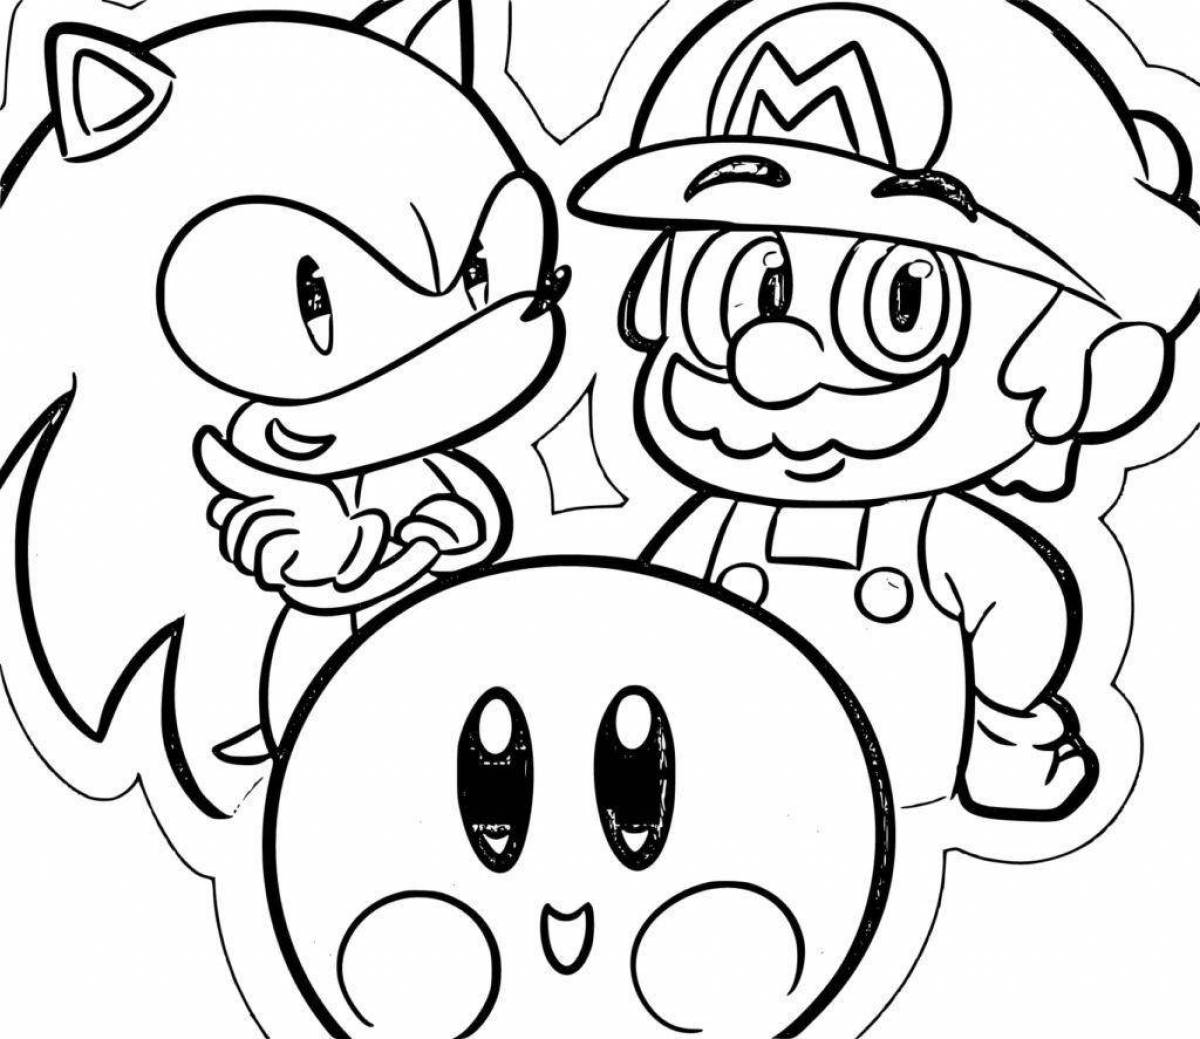 Mario charm by numbers coloring book